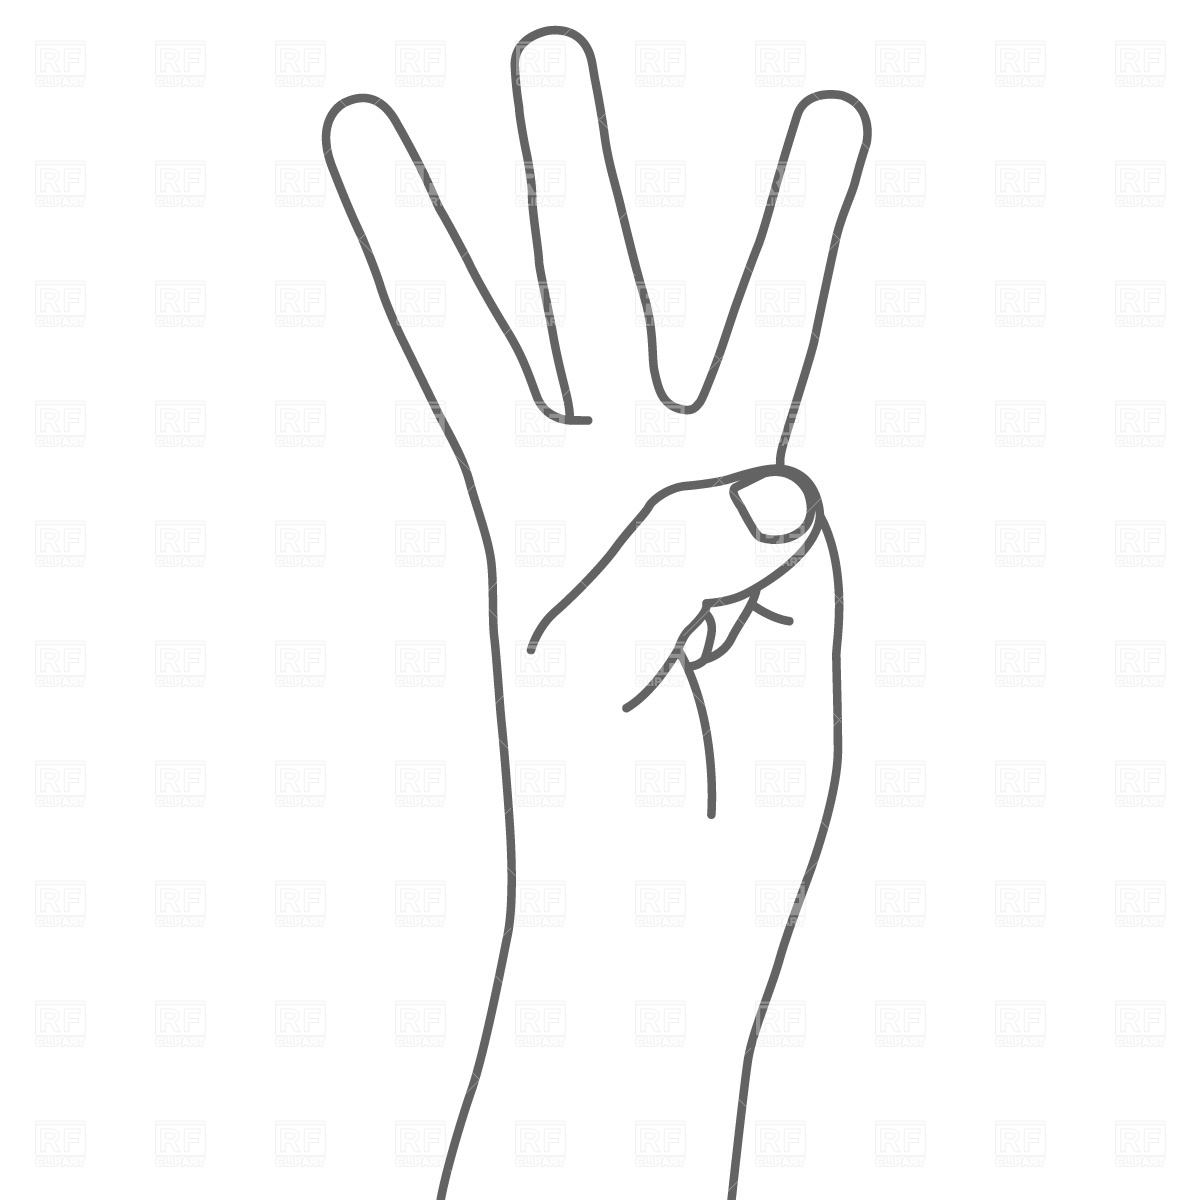 Three Fingers Hand Sign Download Royalty Free Vector Clipart  Eps